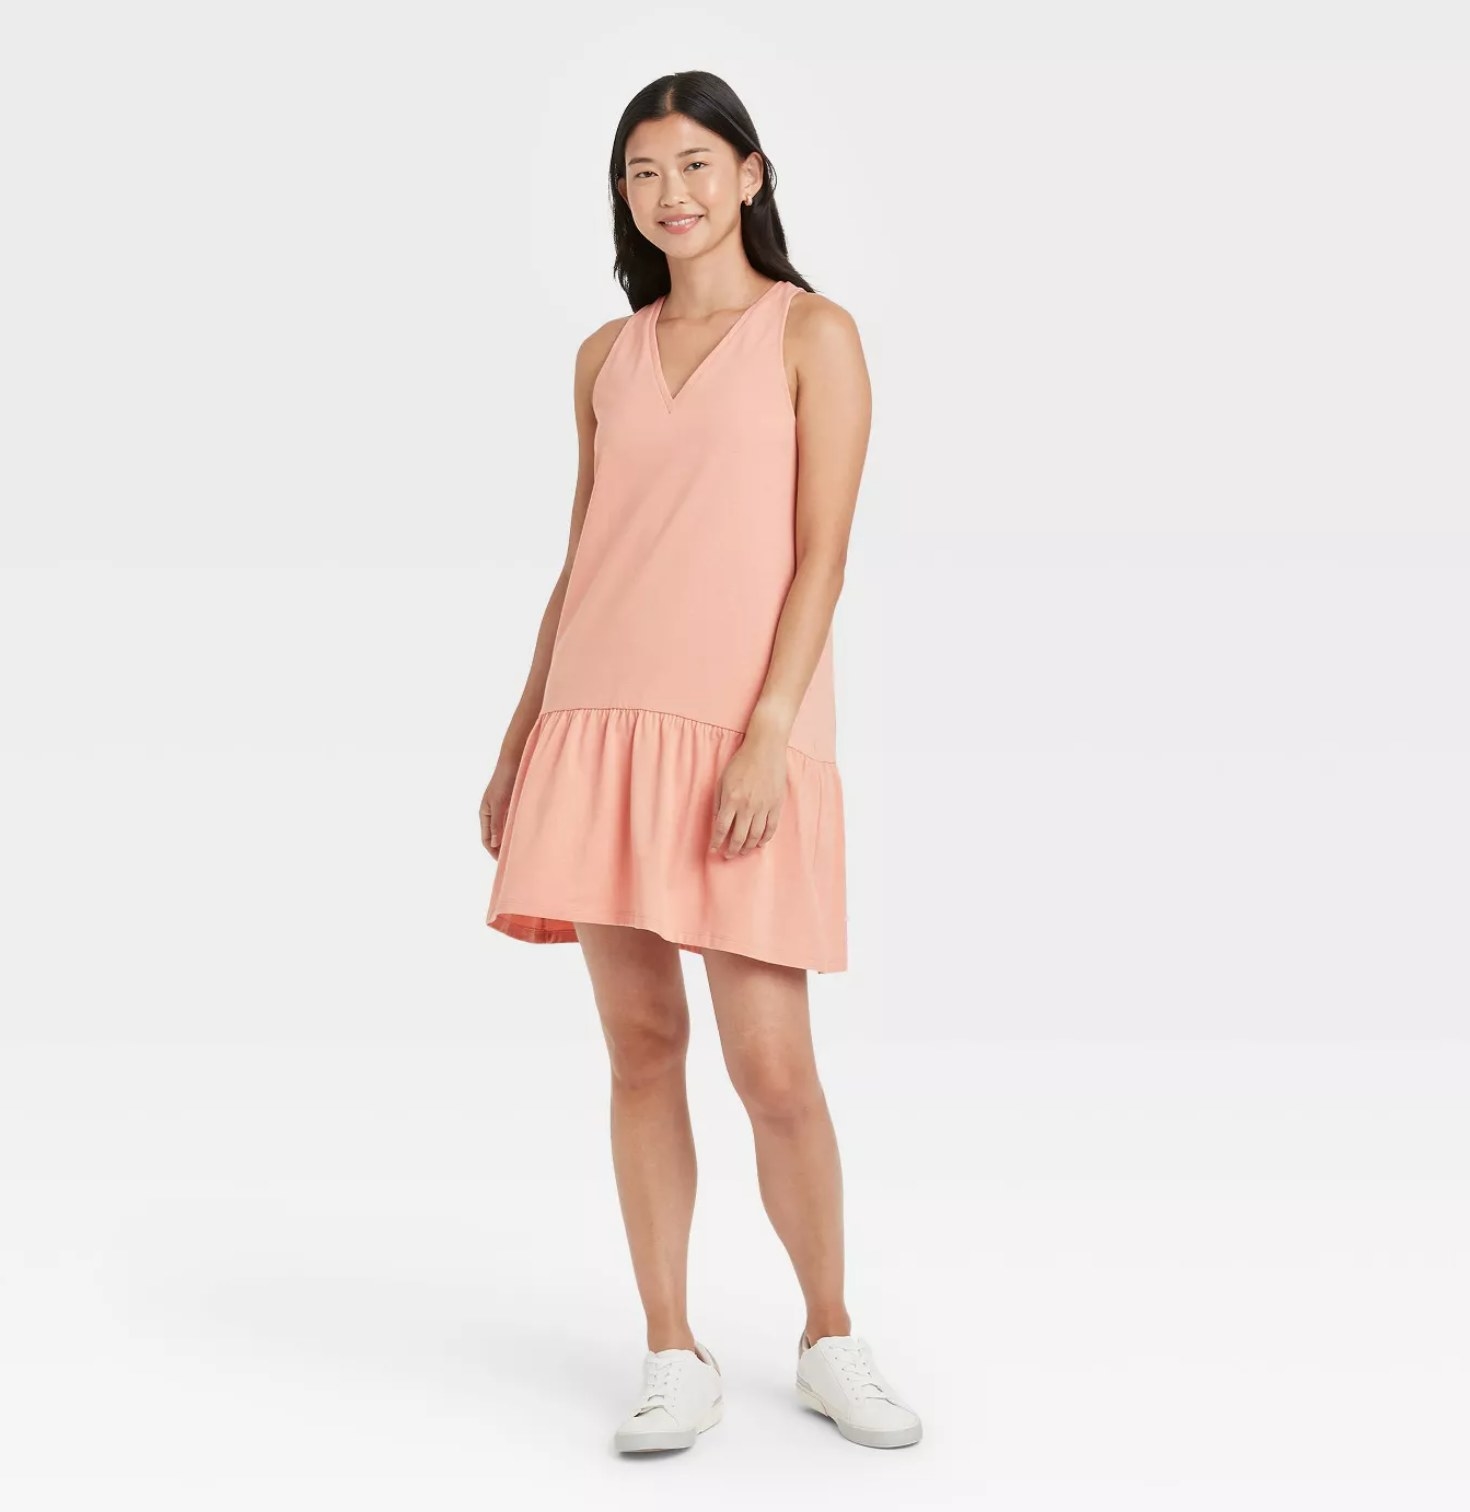 model wearing the dress in pink with white sneakers